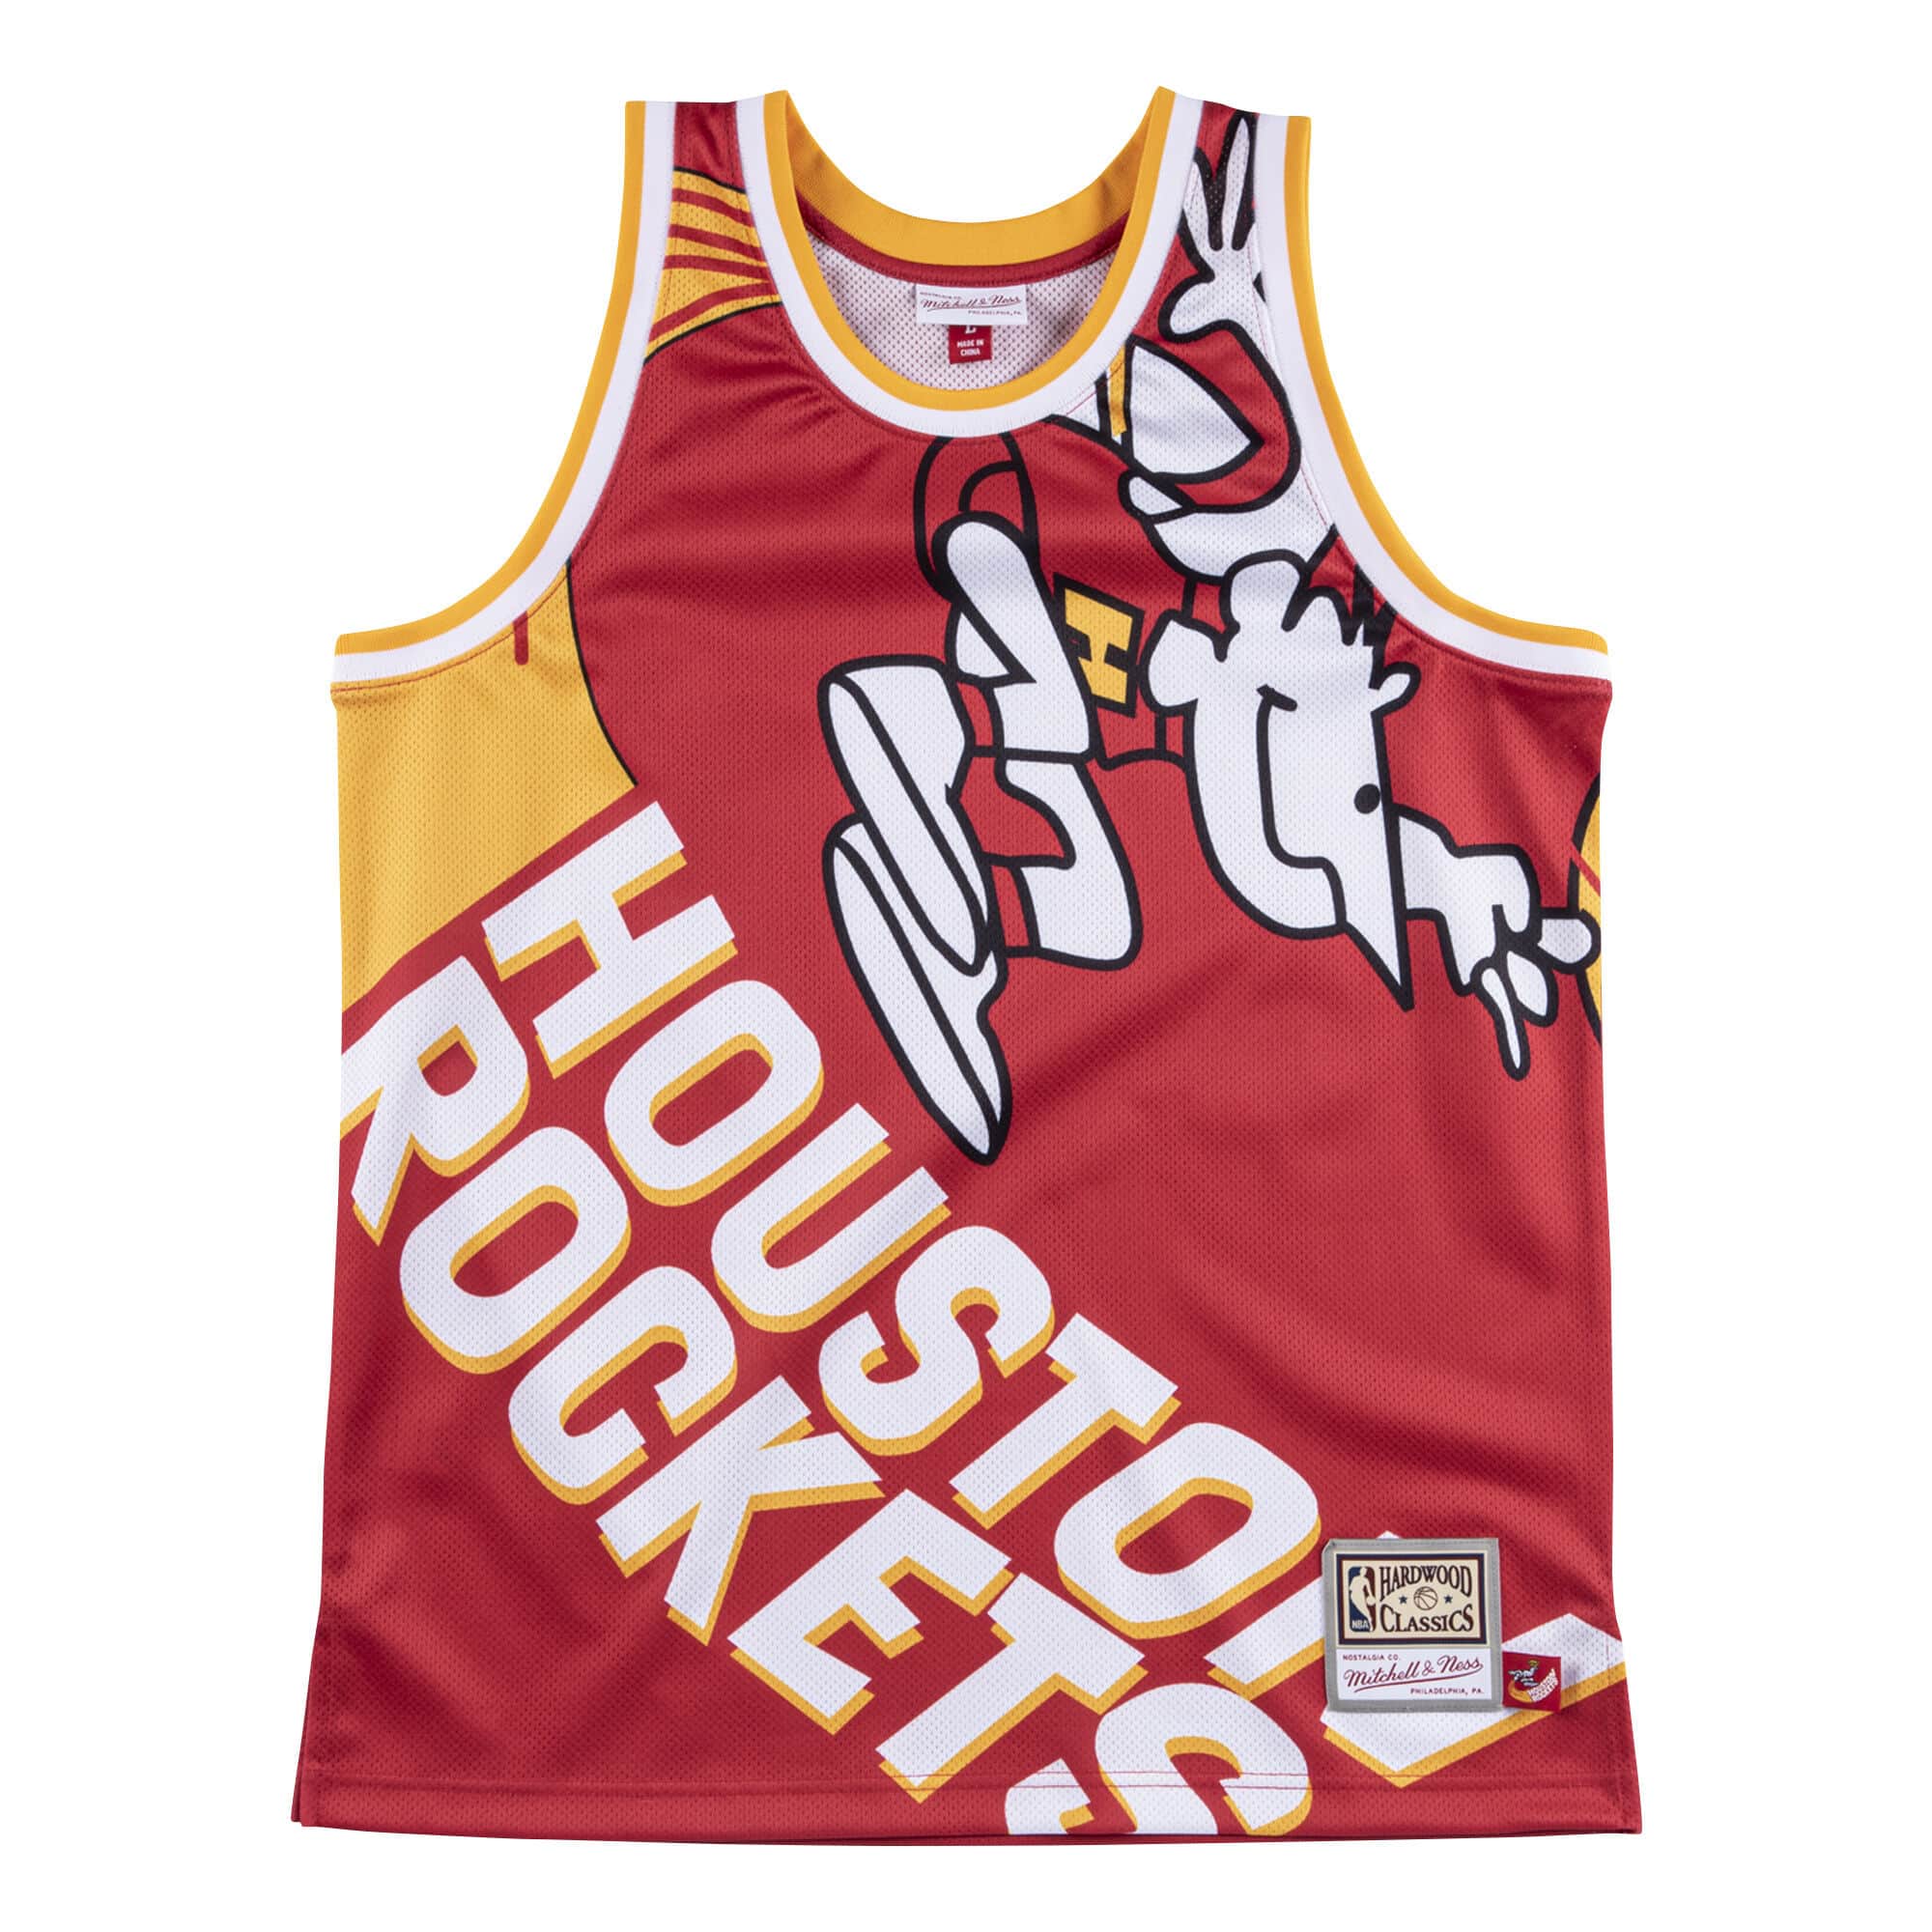 SNKR_TWITR on X: Restocked at $59.95: Mitchell and Ness Big Face